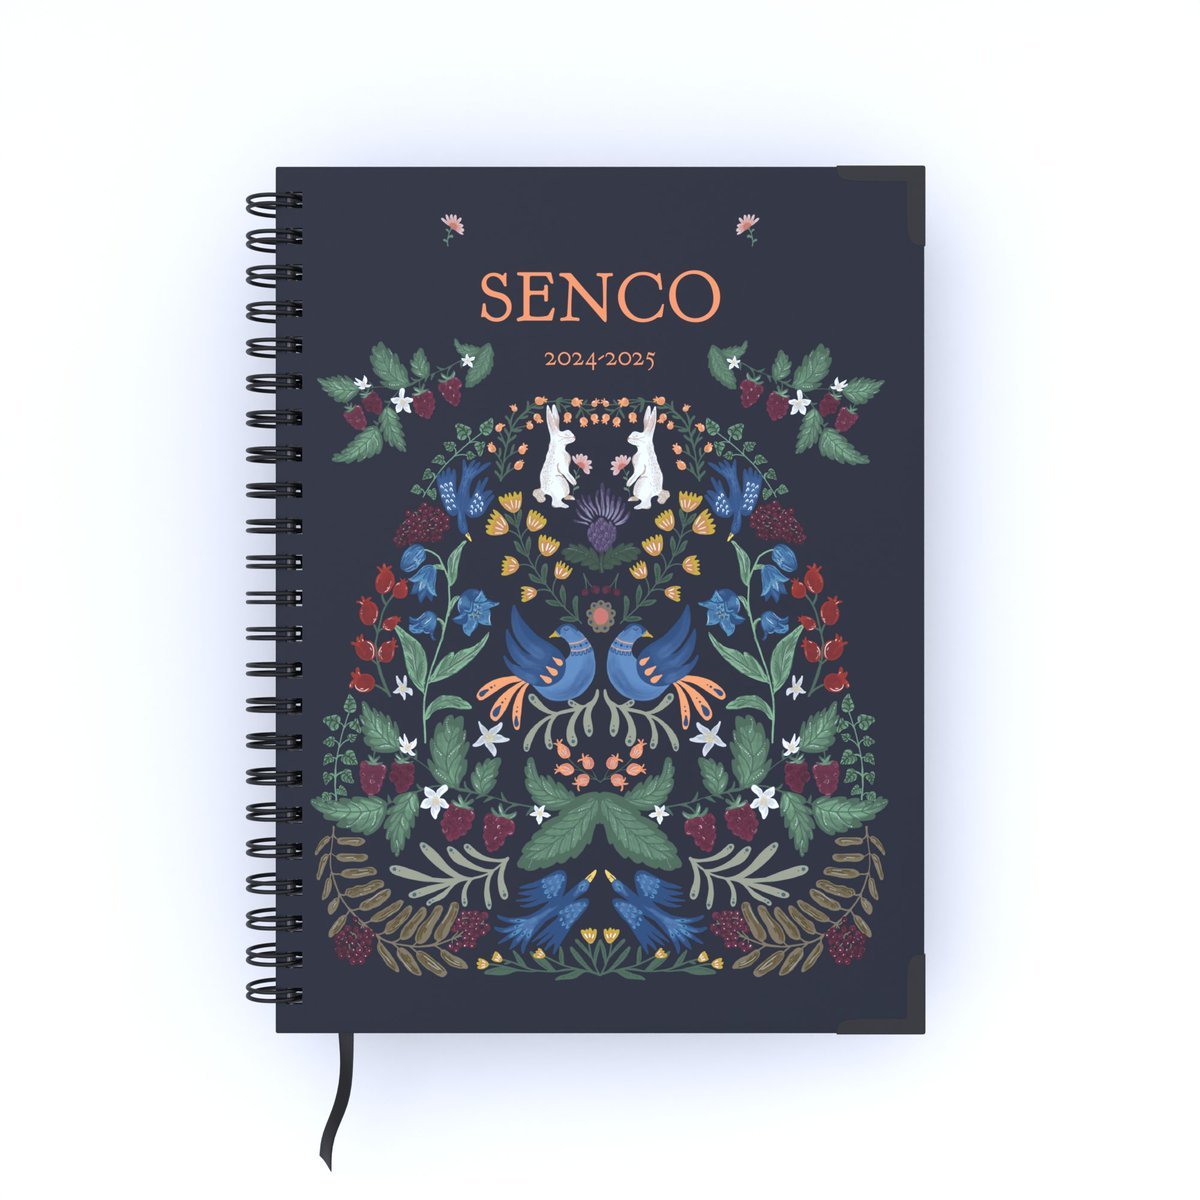 Limited number available! Get your SENCO Secret Garden Planner for the 2024-25 school year before they're gone! headteacherchat.com/planners/senco…